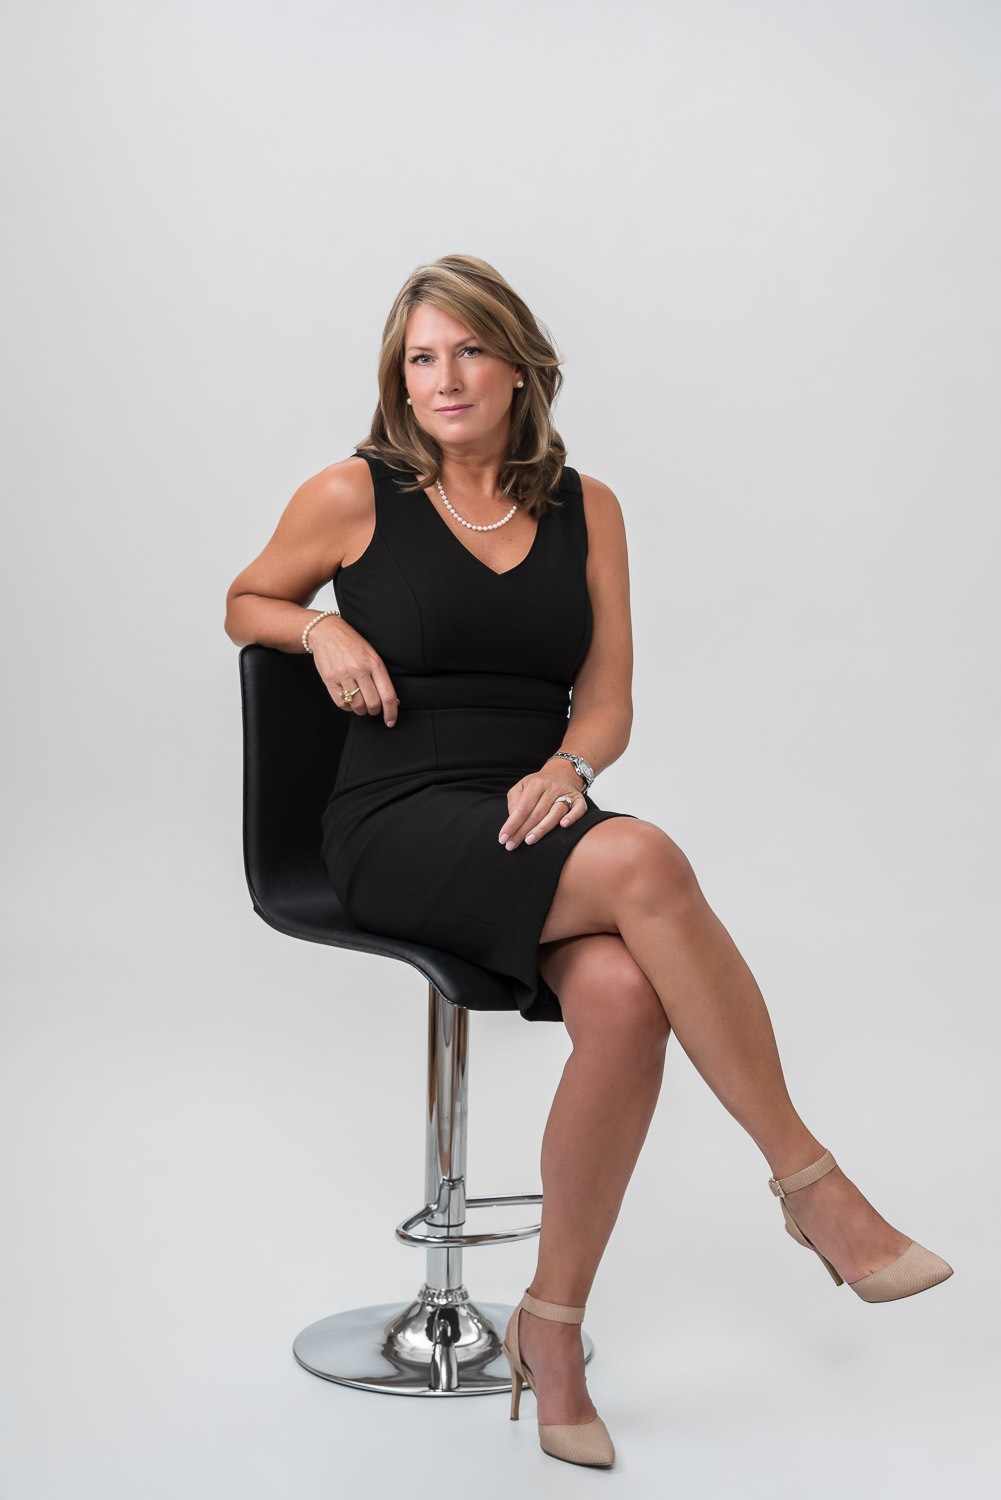 Full Length Personal Branding Photo of a woman in studio